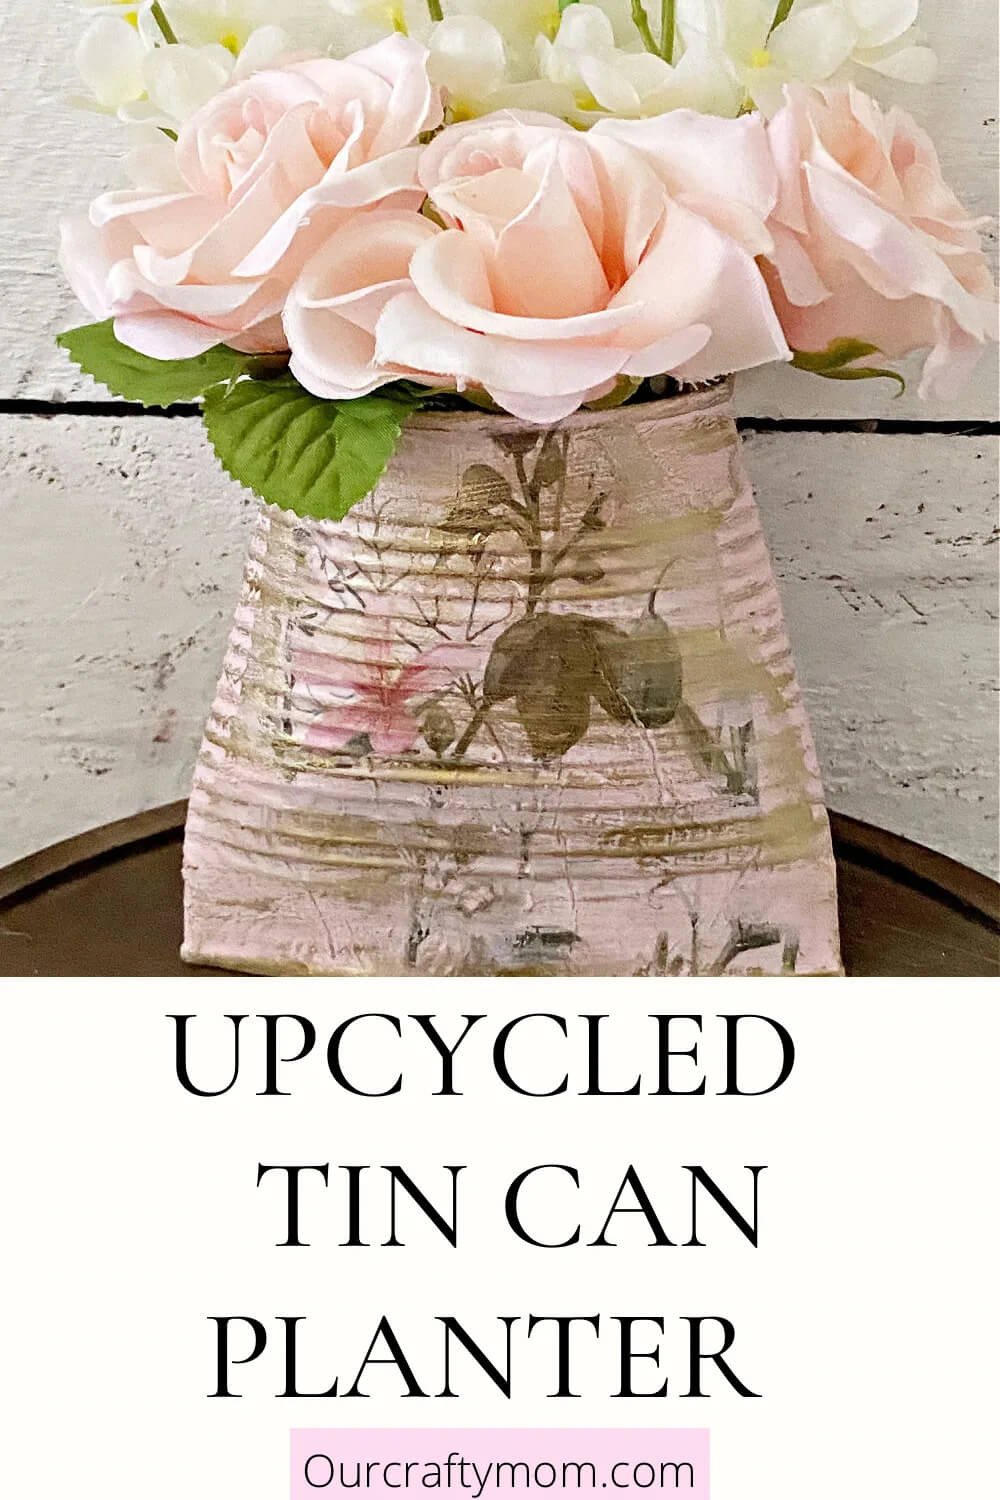 In Frugal Crafts: Don't Throw Out Those Cans, this one becomes a pocket planter